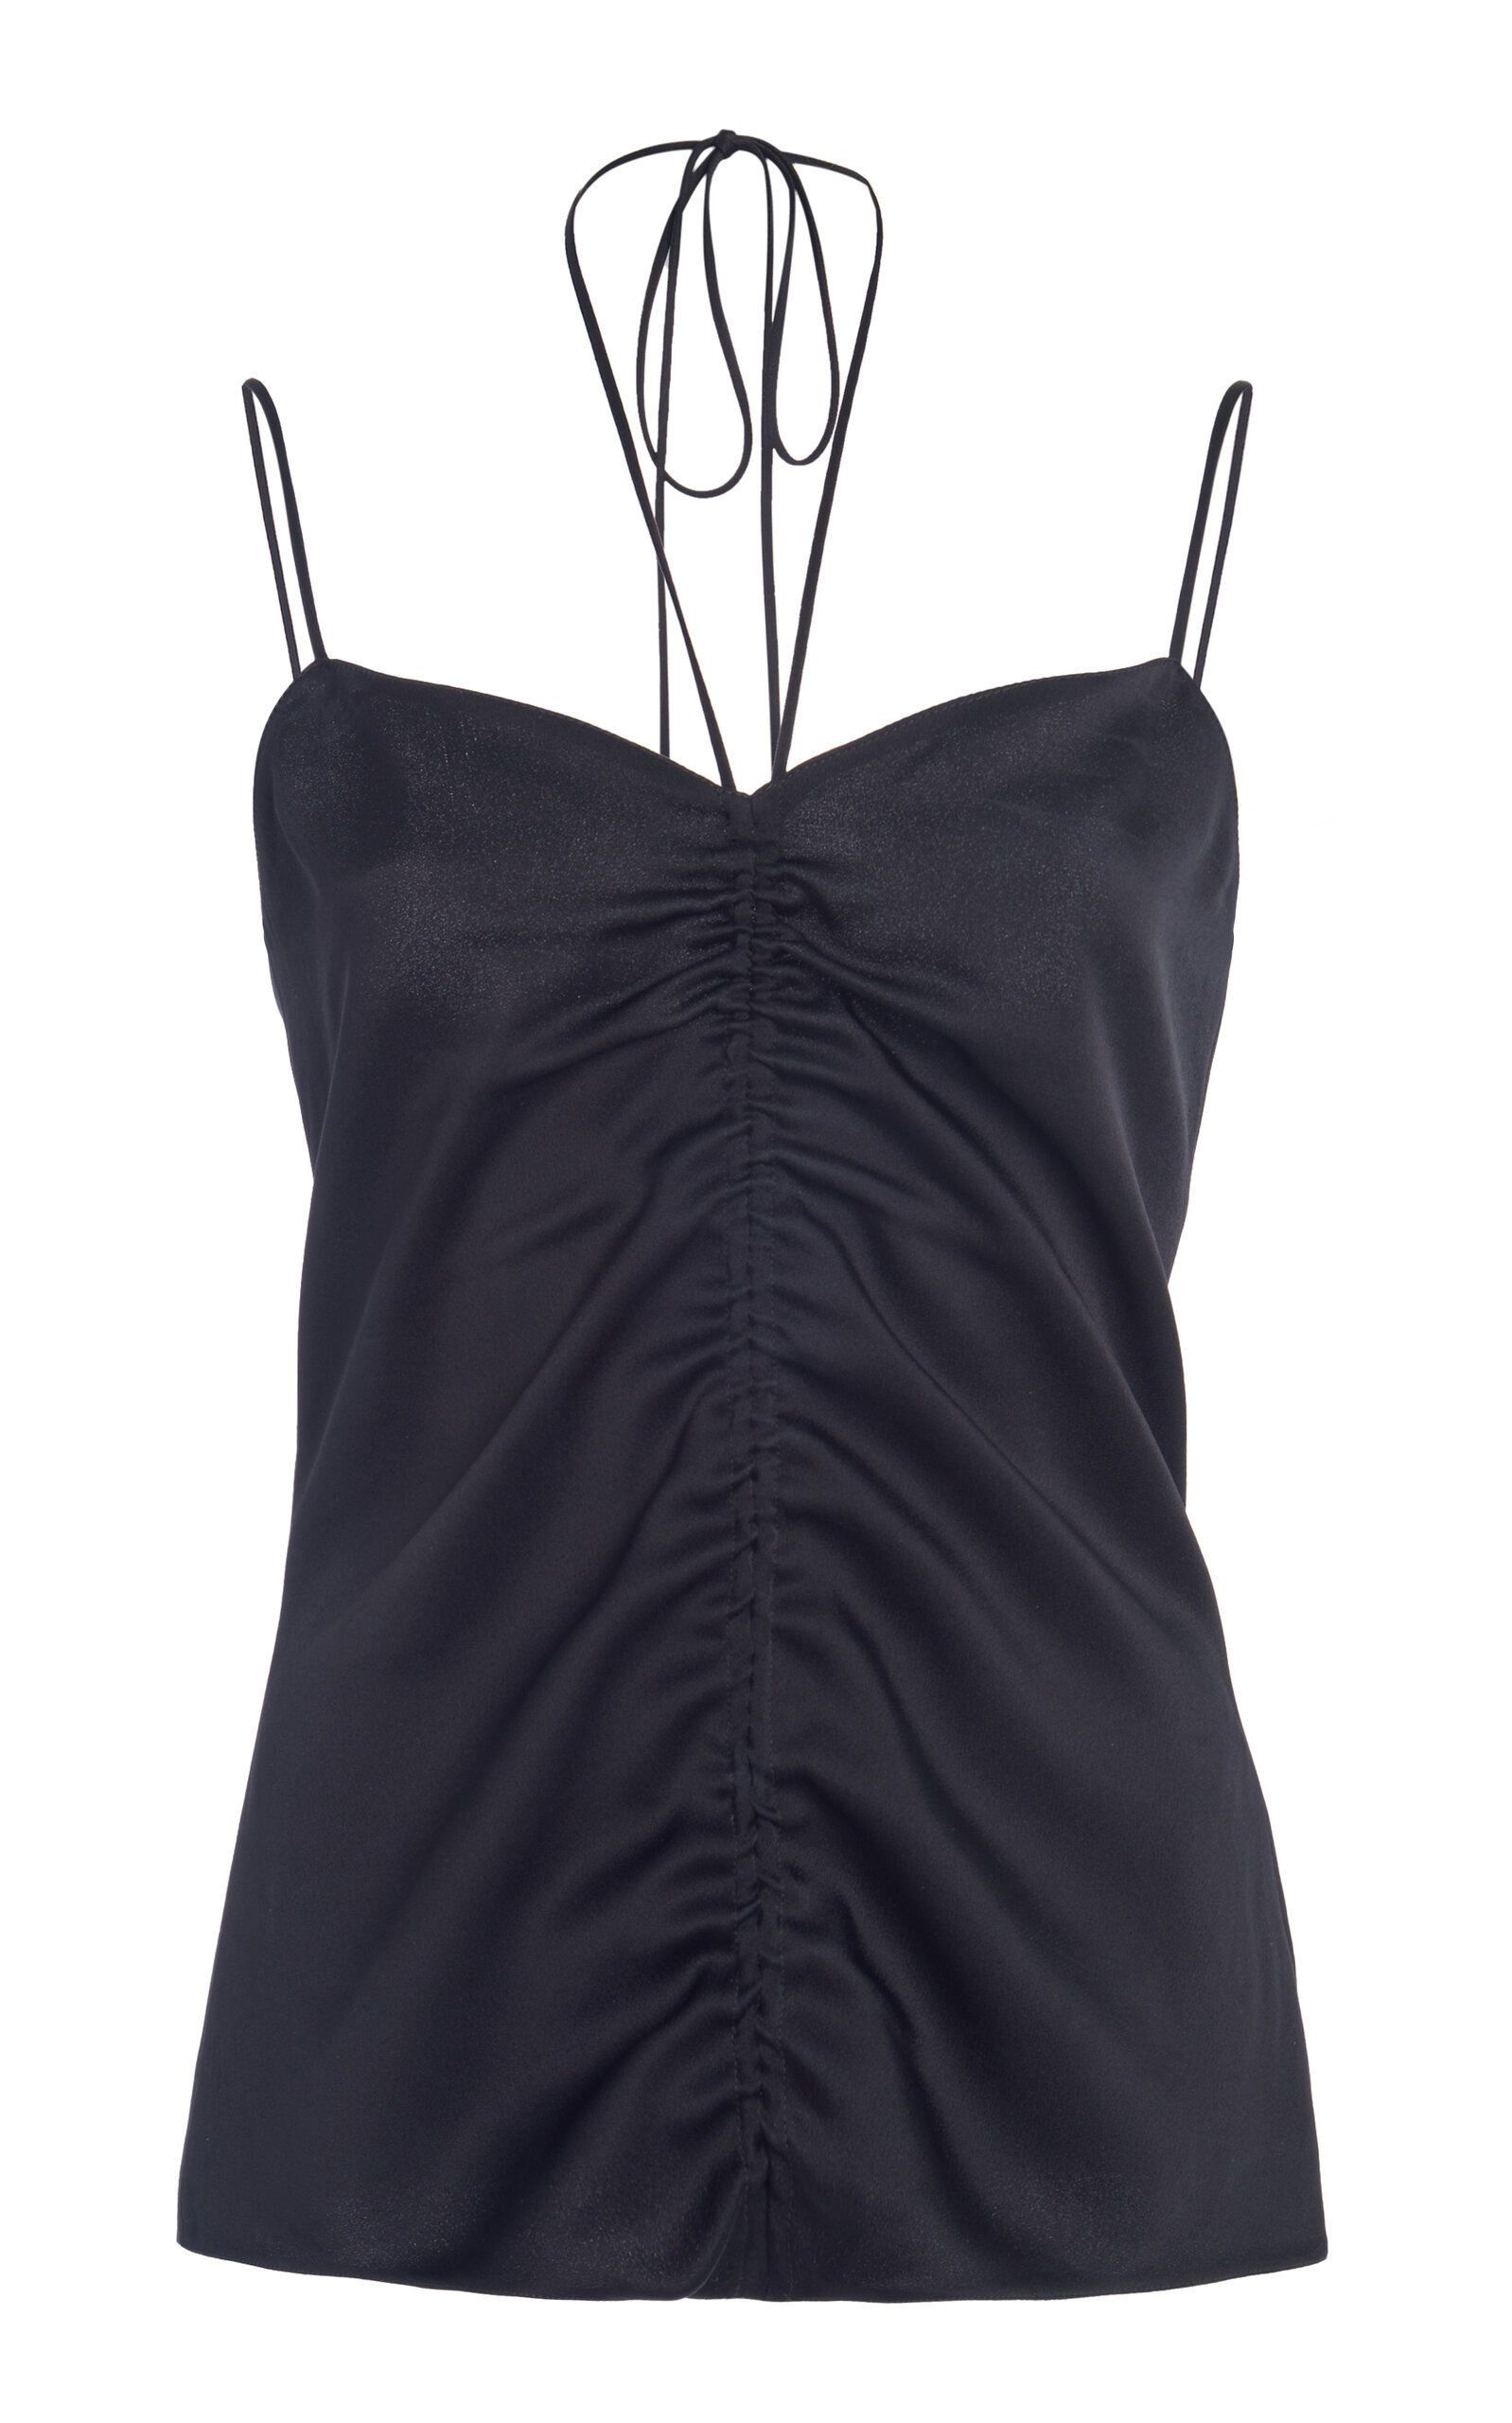 Del Core Women's Ruched Camisole Top